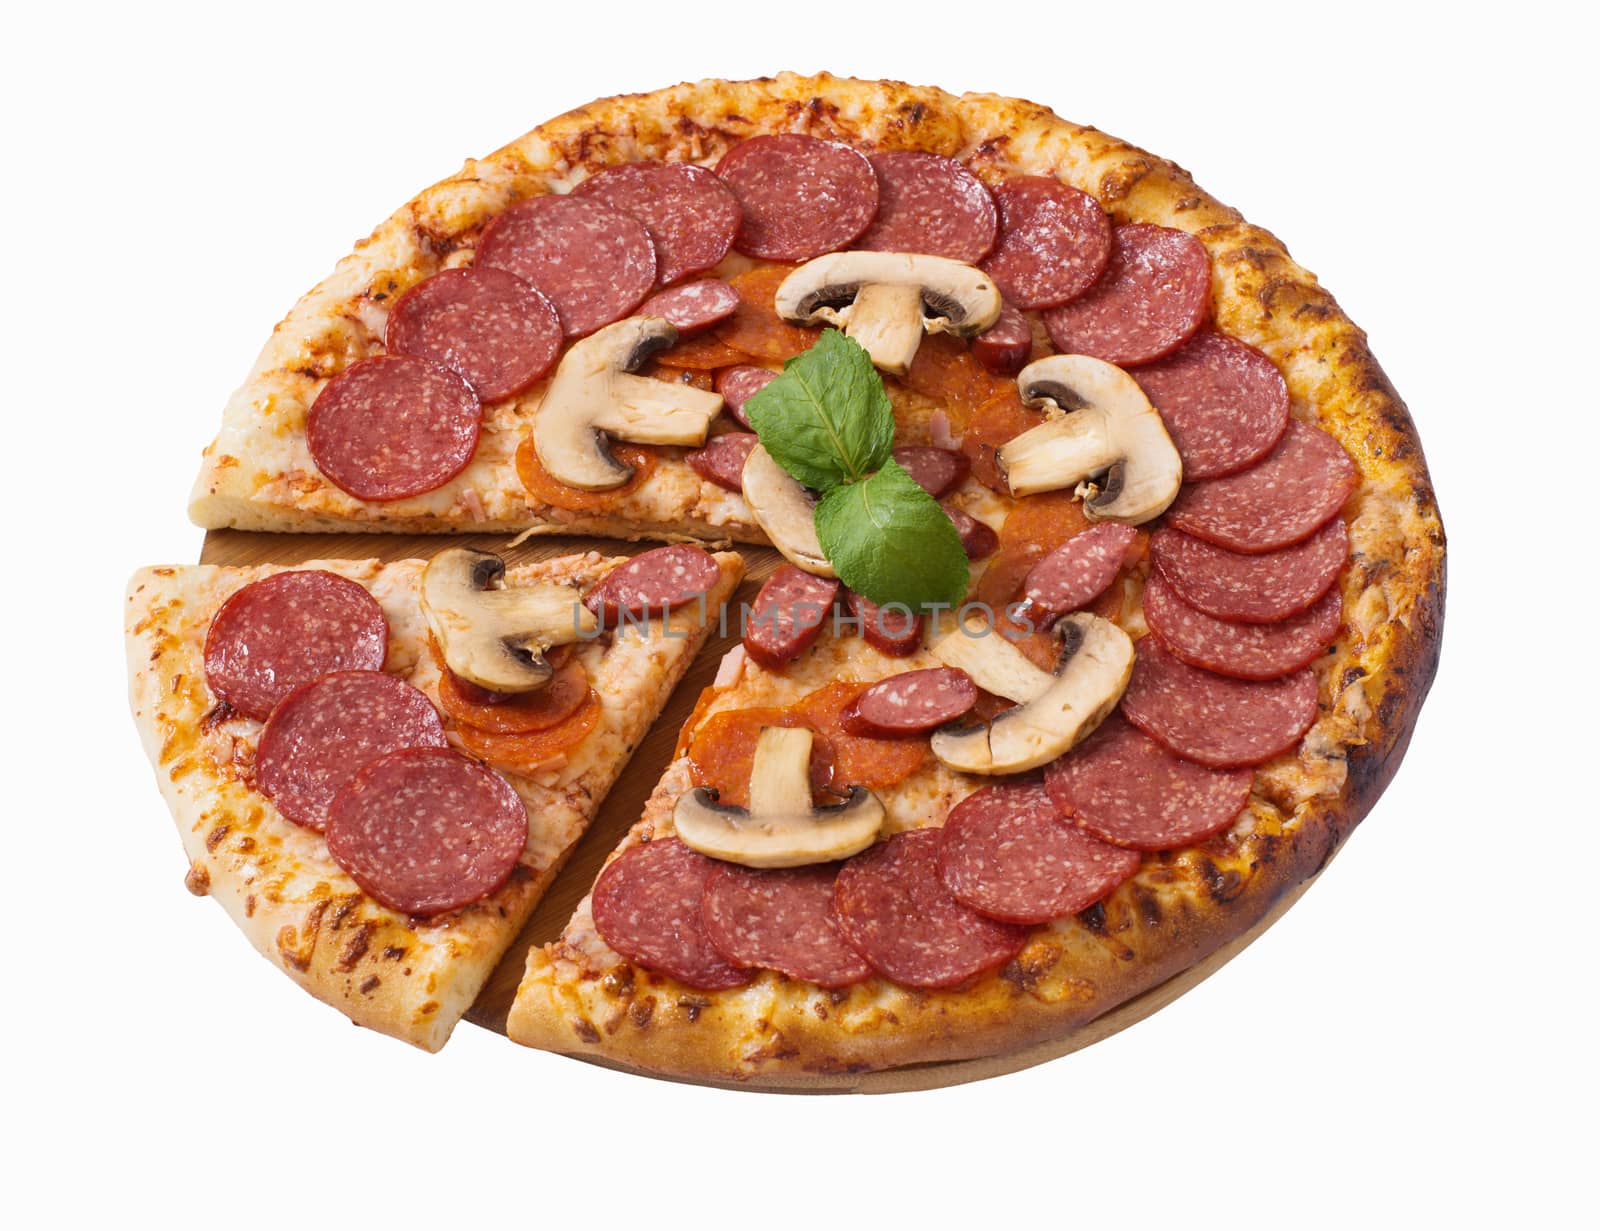 Tasty pizza with  pepperoni and mushrooms  isolated on white